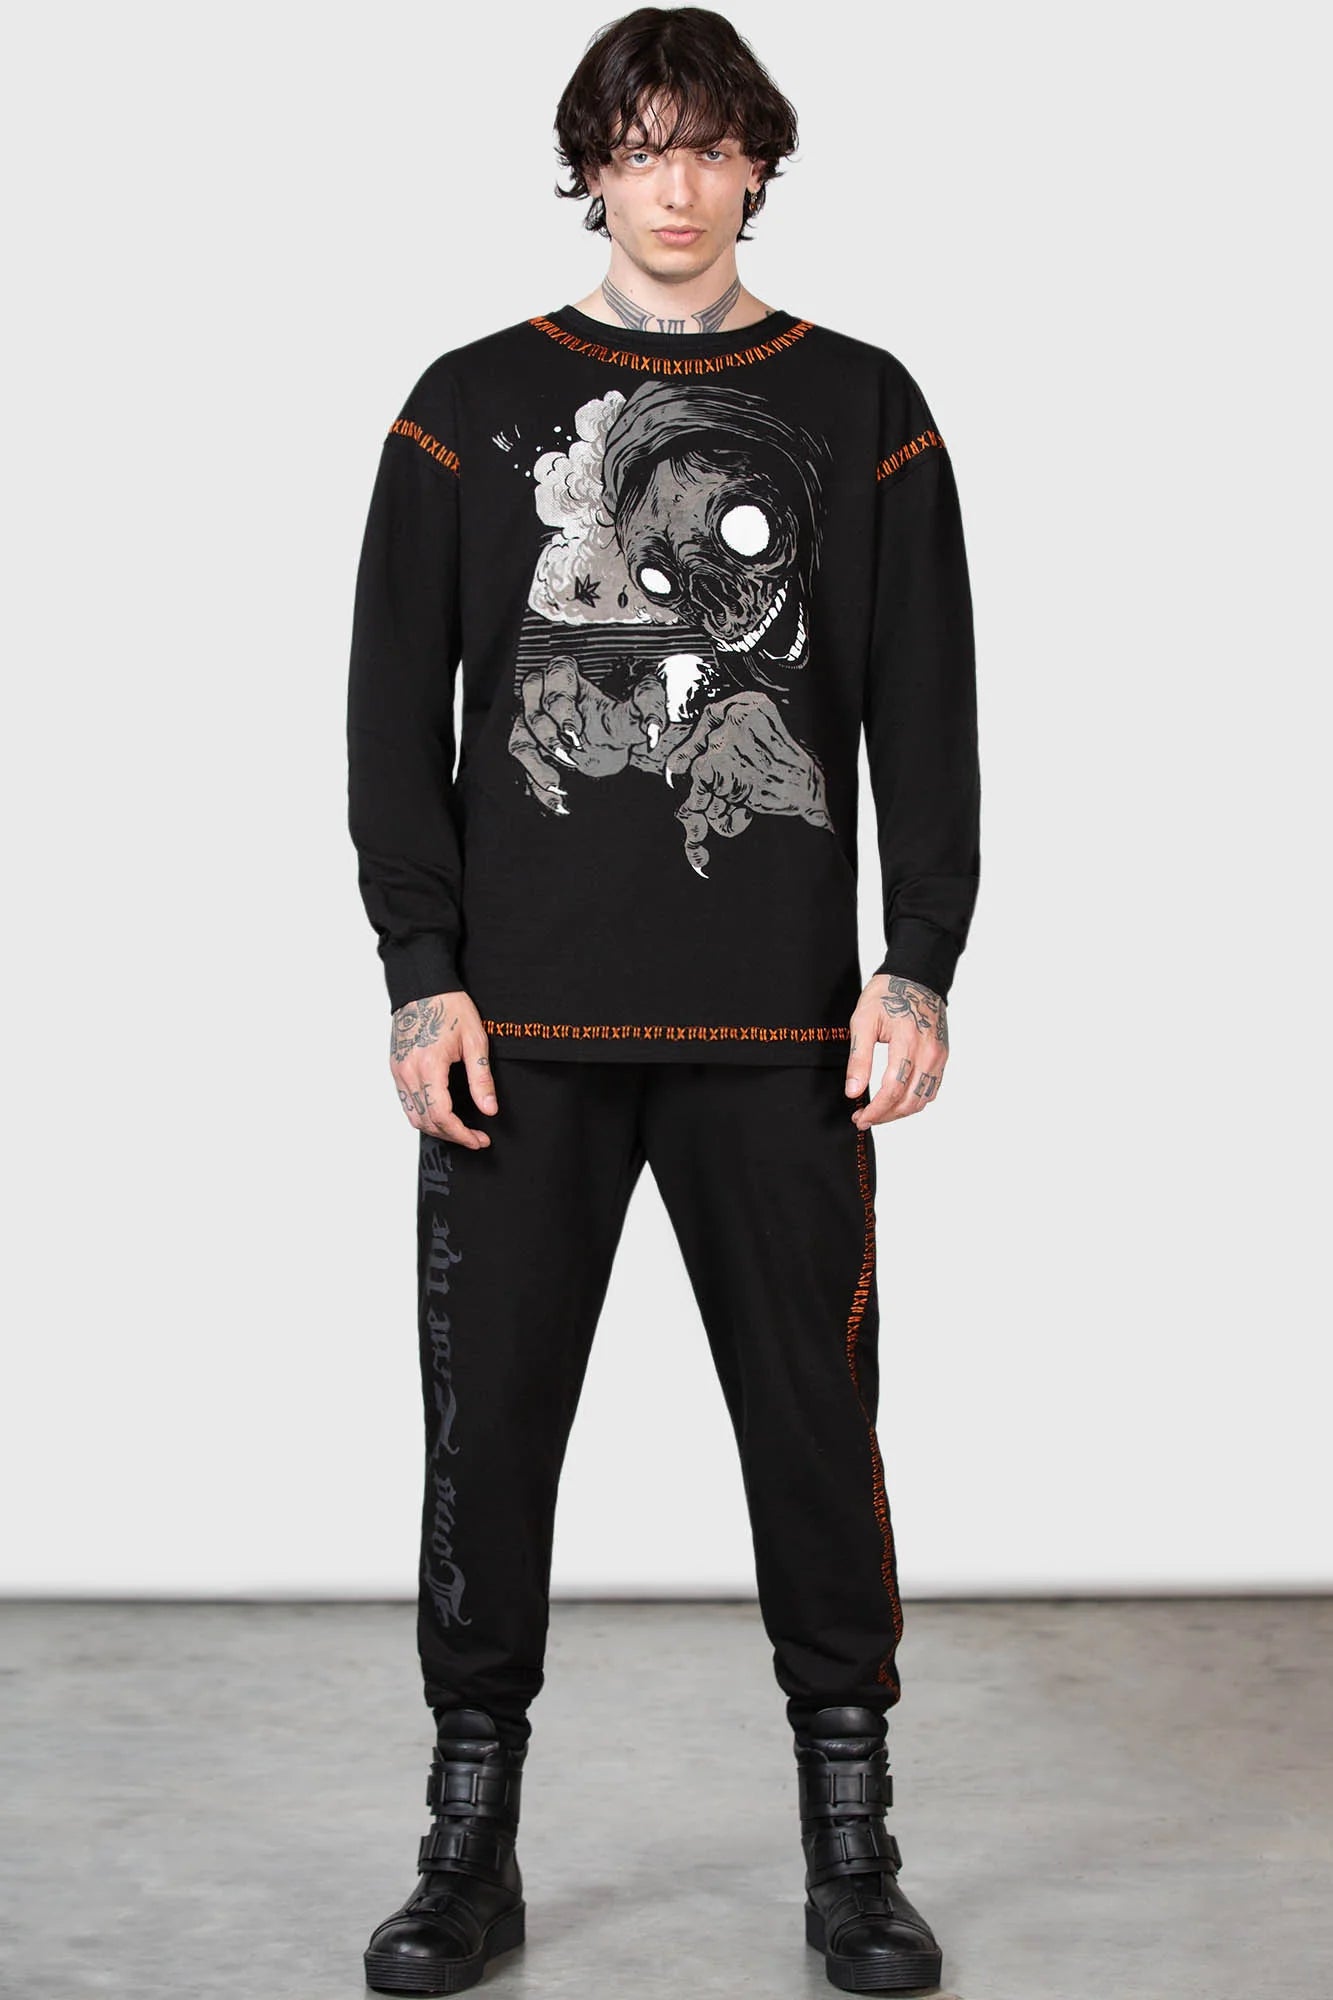 Killstar Fatality Sweater Mens/Unisex with Print and Feature Orange Stitching - Kate's Clothing